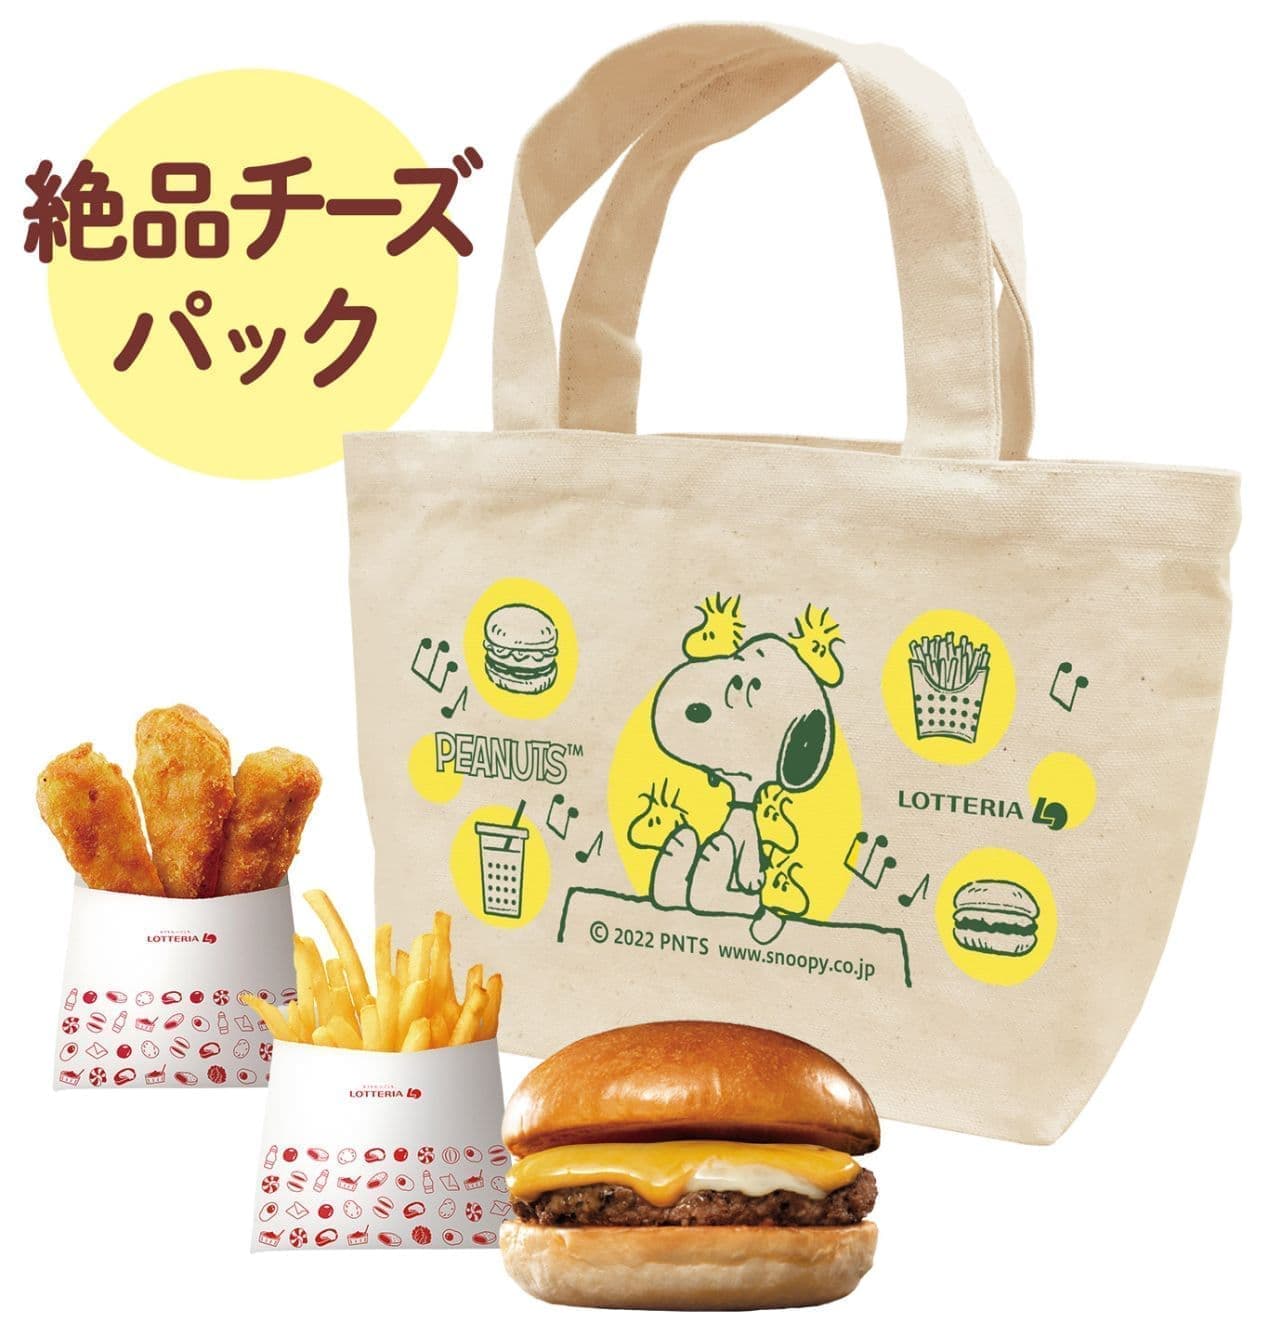 Lotteria "Feels like a walk with Snoopy..." Excellent cheese pack with lunch tote bag.